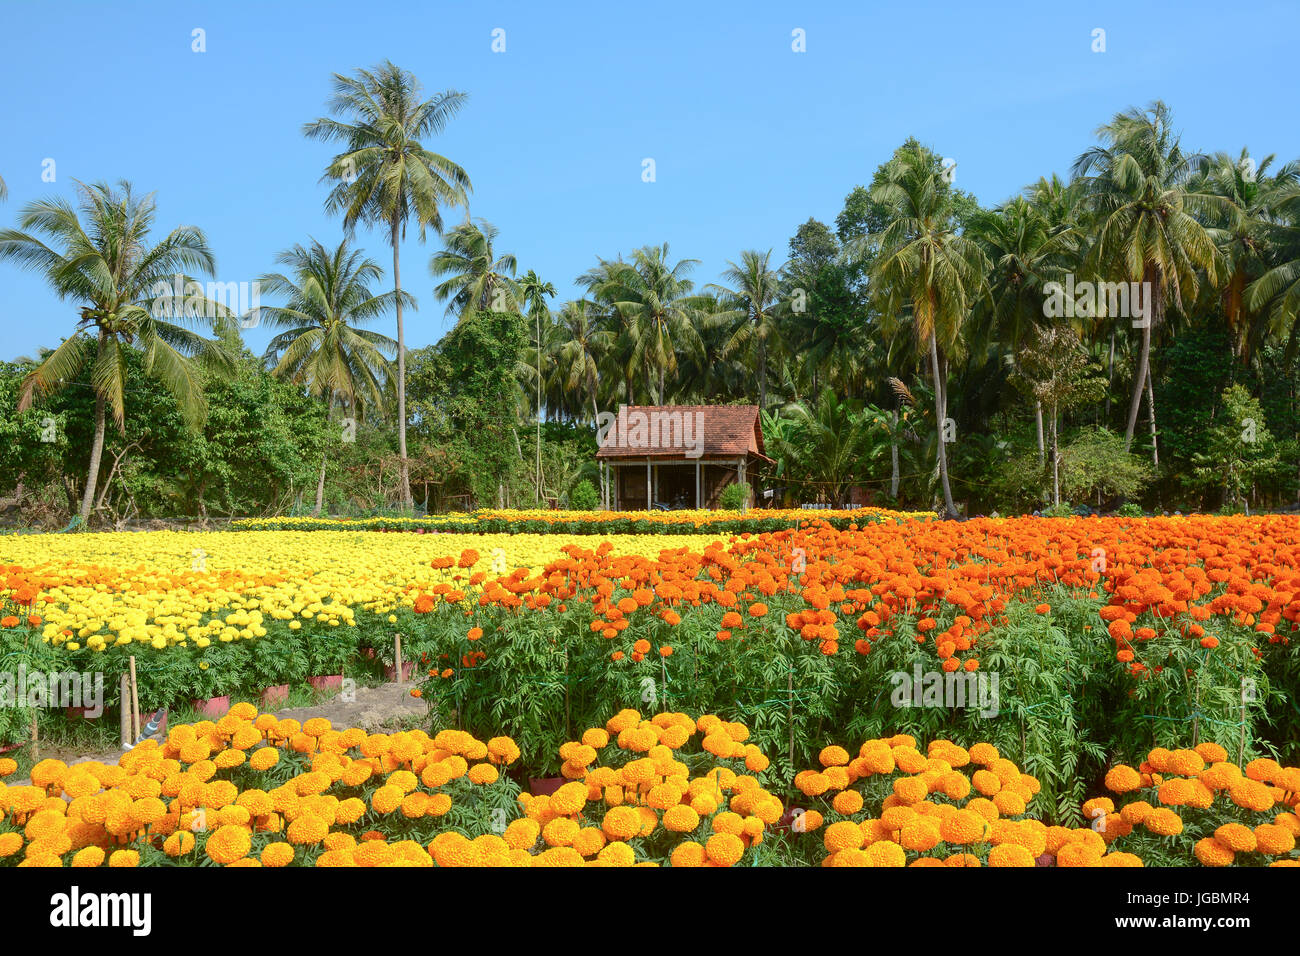 Tagetes flower plantation with the traditional wooden house in Mekong Delta, Vietnam. Stock Photo